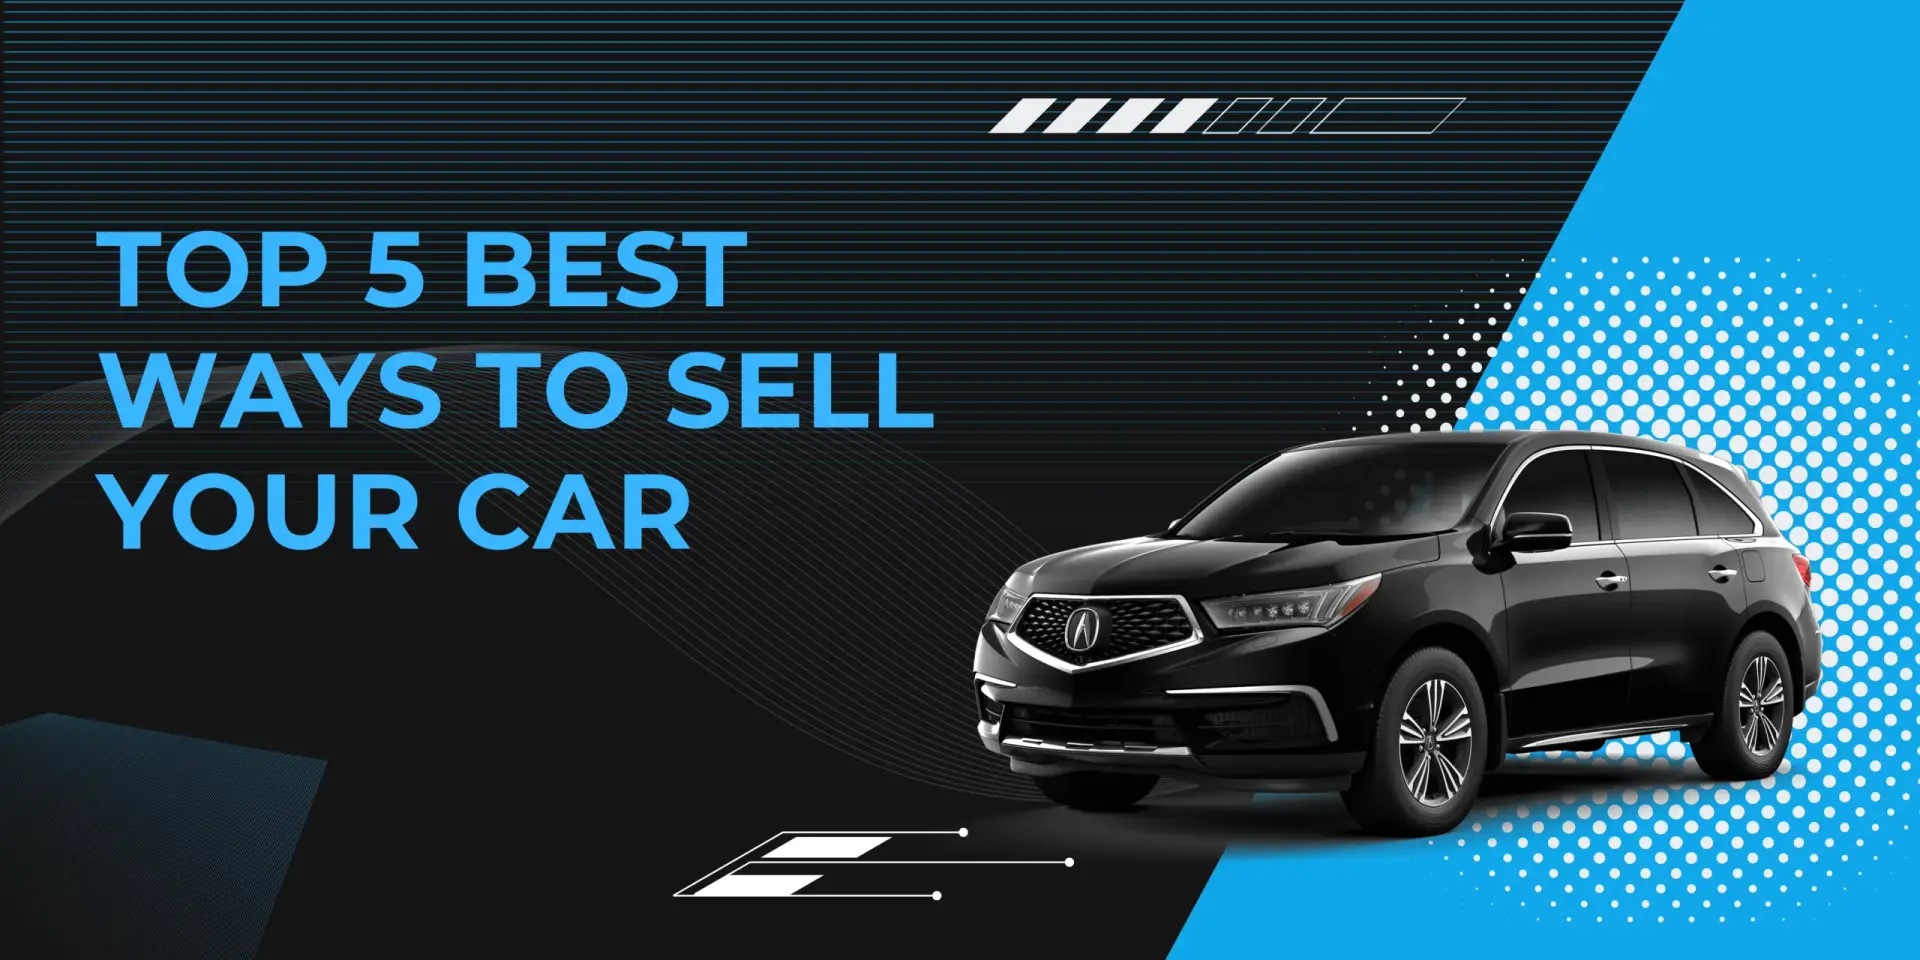 Top 5 best ways to sell your car